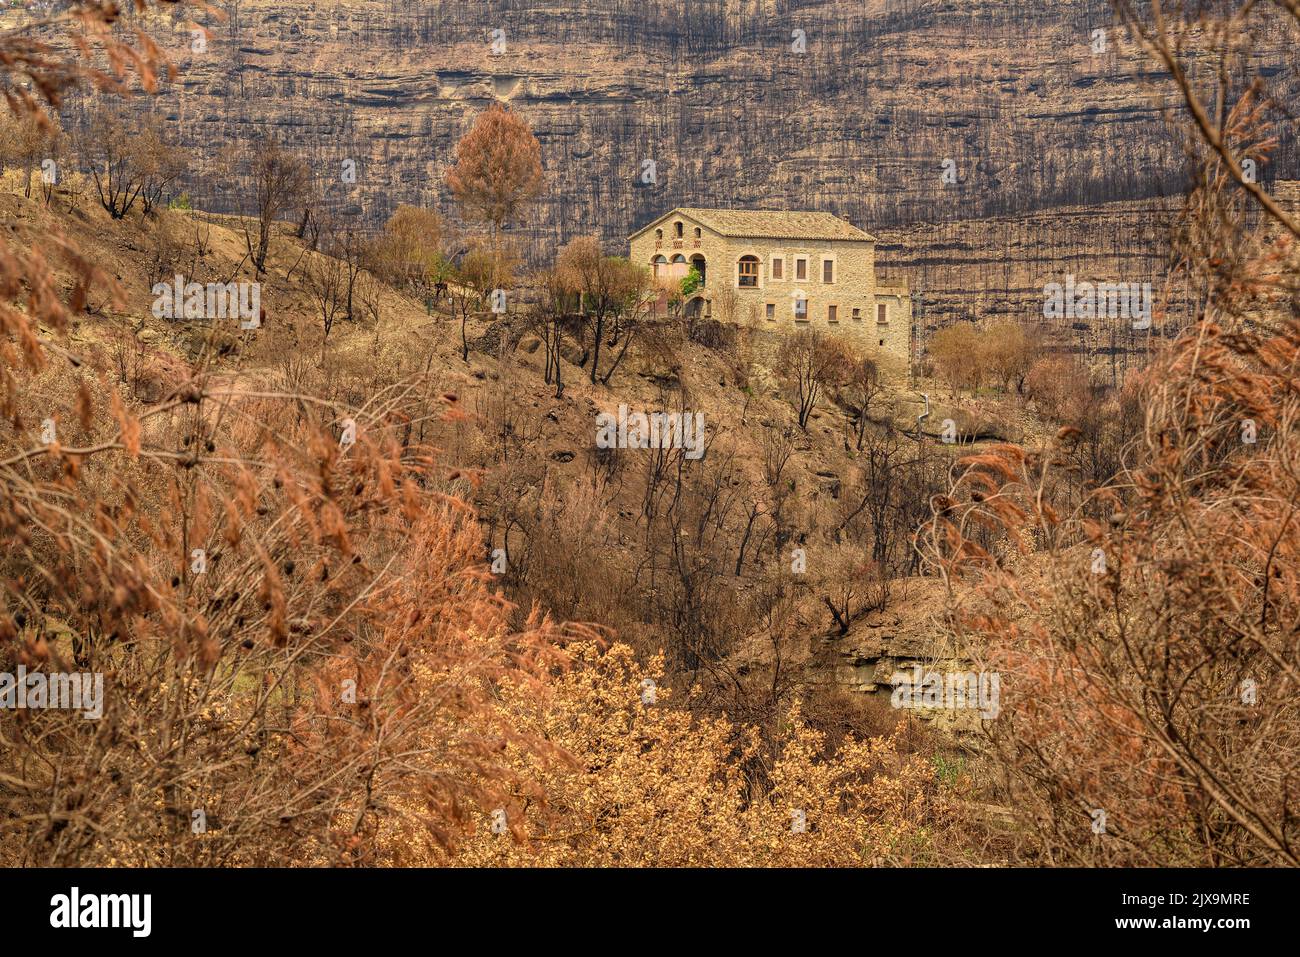 A house surrounded by forest burned after the 2022 Pont de Vilomara wildfire (Bages, Barcelona, Catalonia, Spain)  ESP: Una casa y bosque quemado Stock Photo